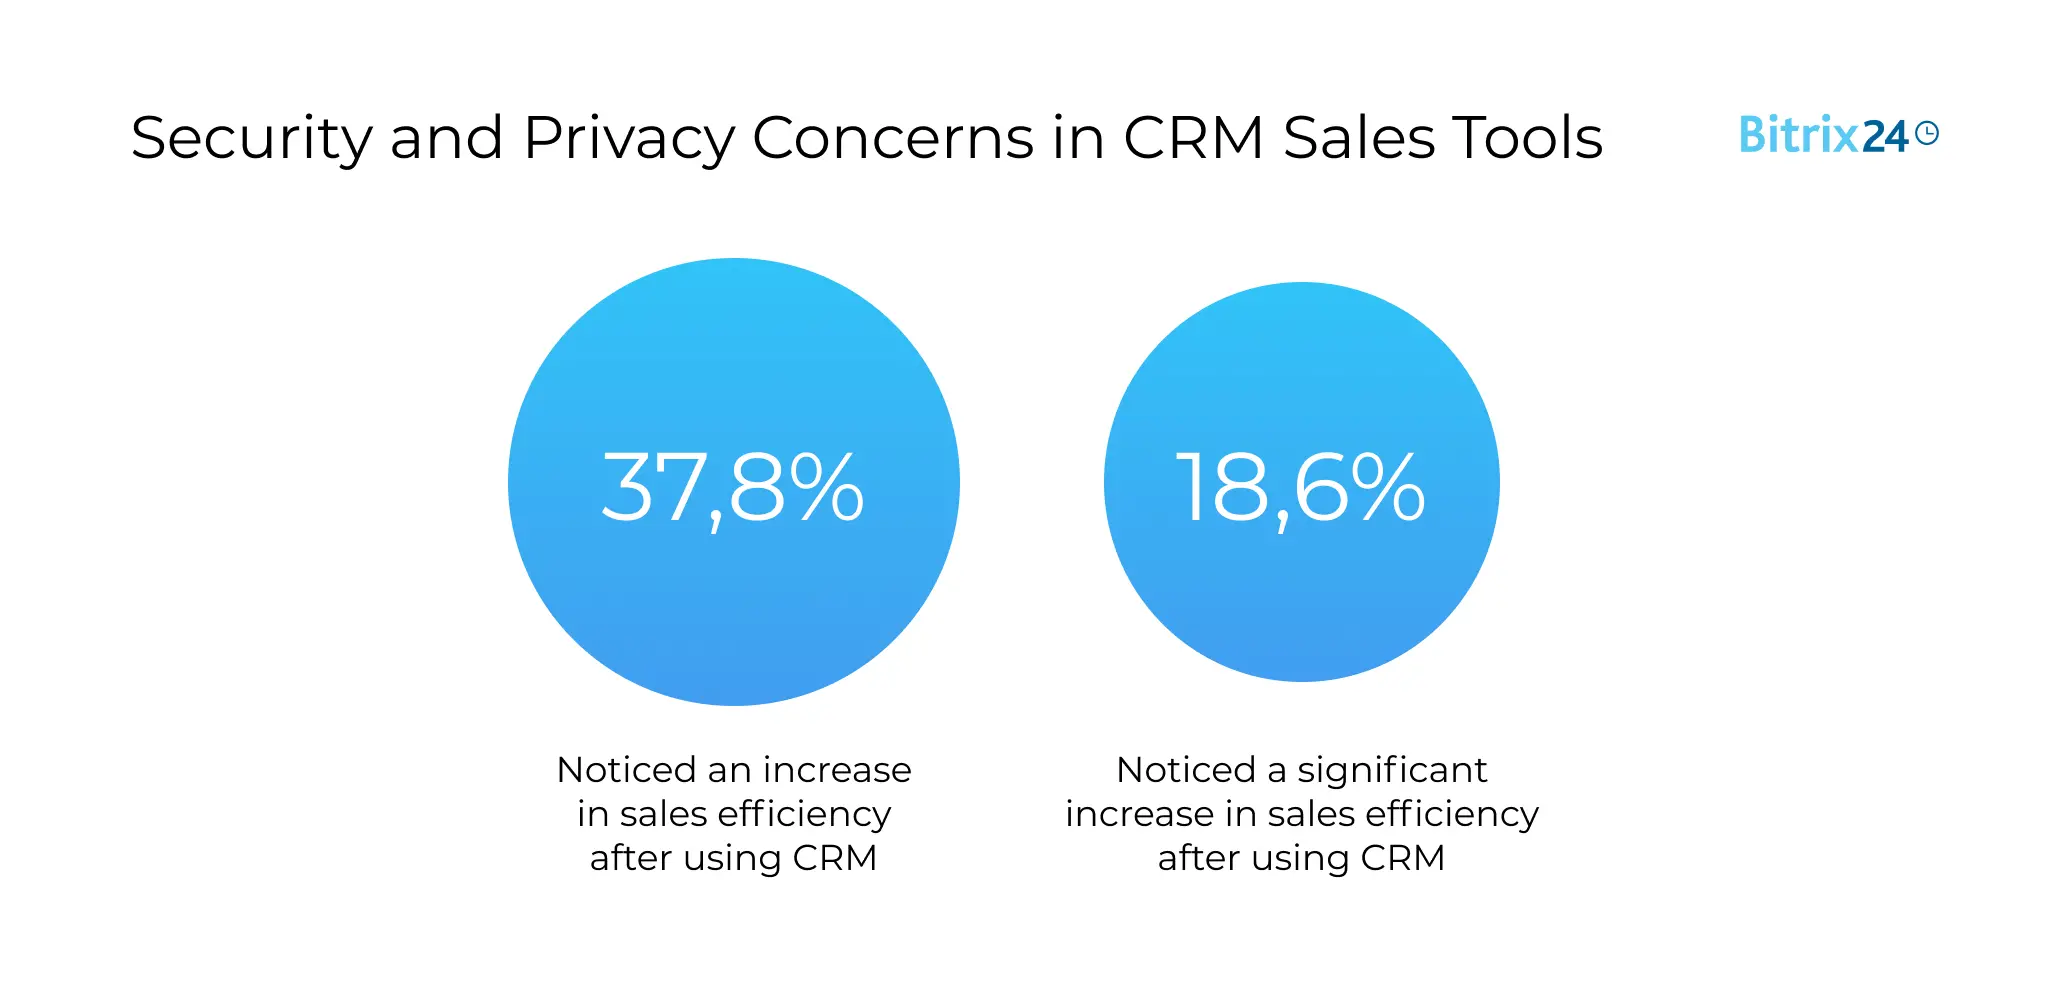 Security and Privacy in CRM Sales Tools